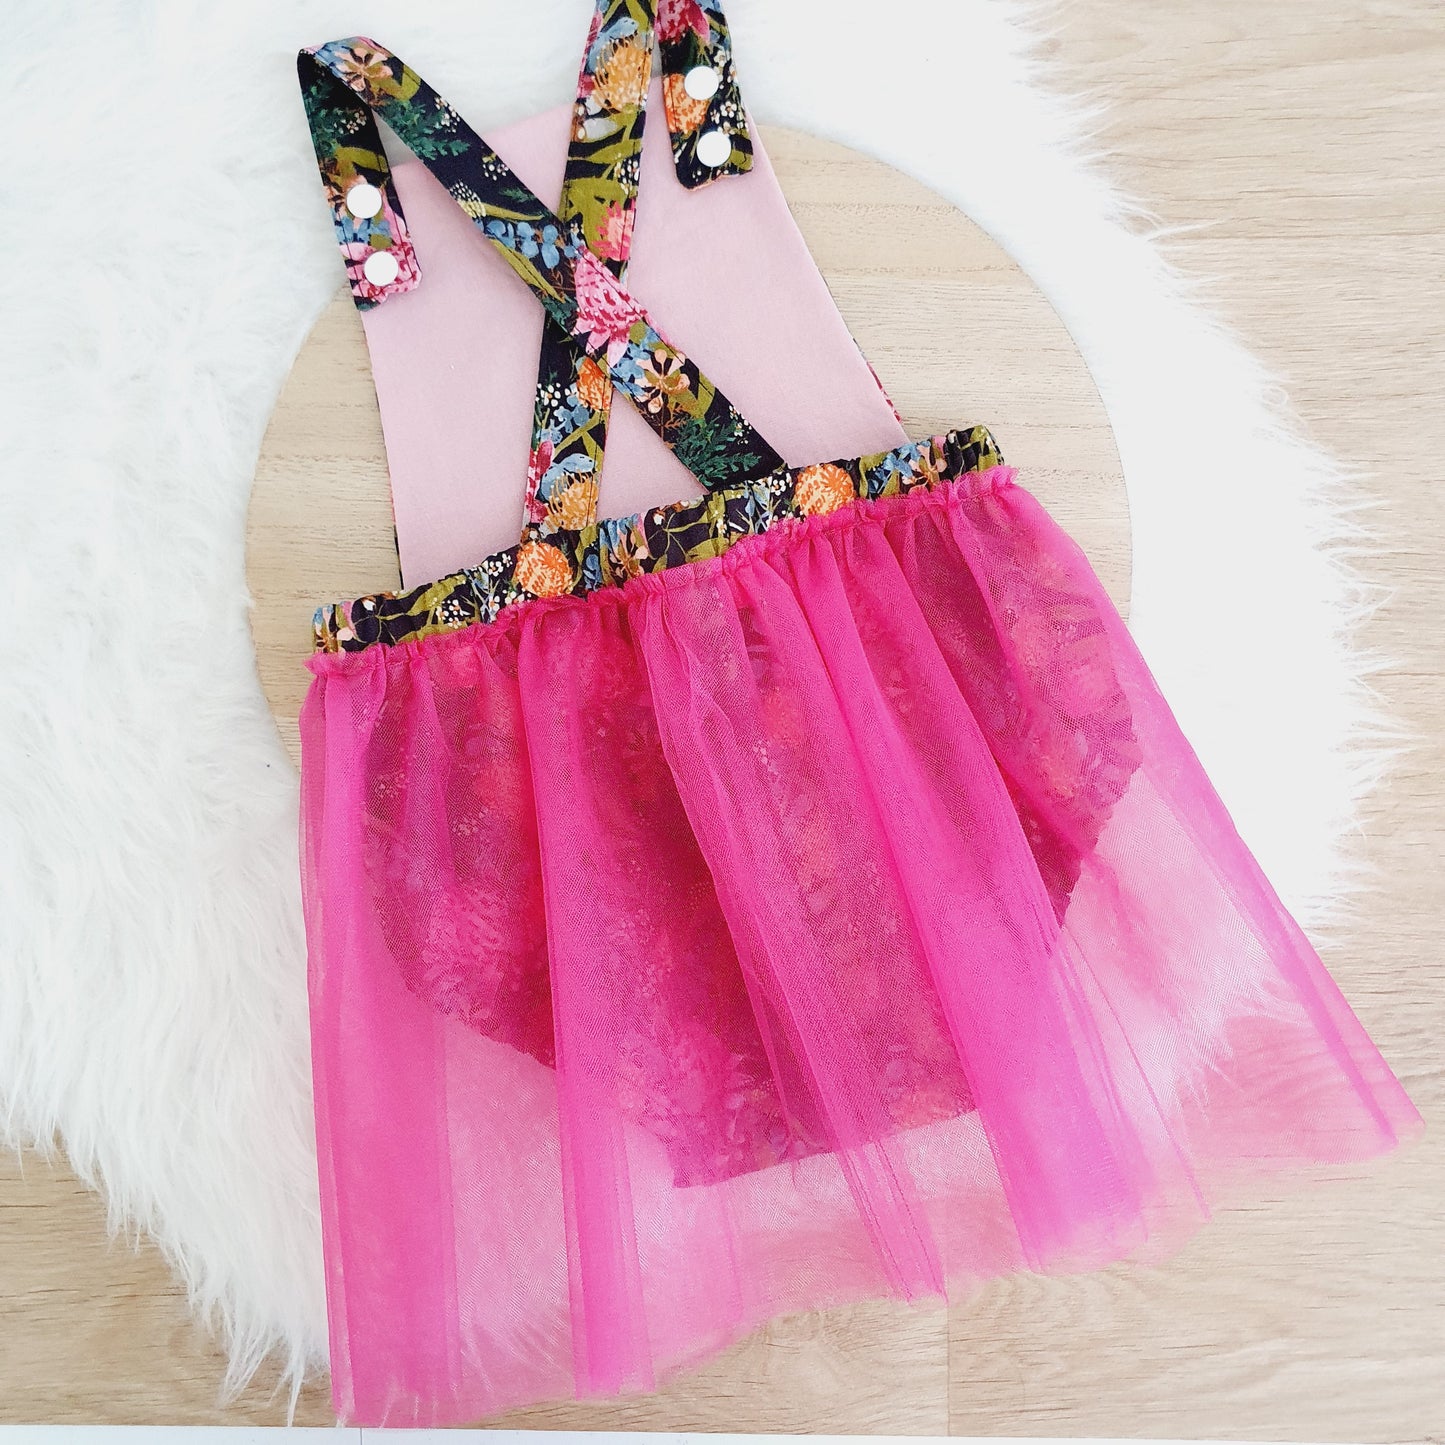 FLORAL Romper Baby / Toddler / Child Clothing / Birthday Outfit, Size 2 - NATIVE Flowers with pink tulle